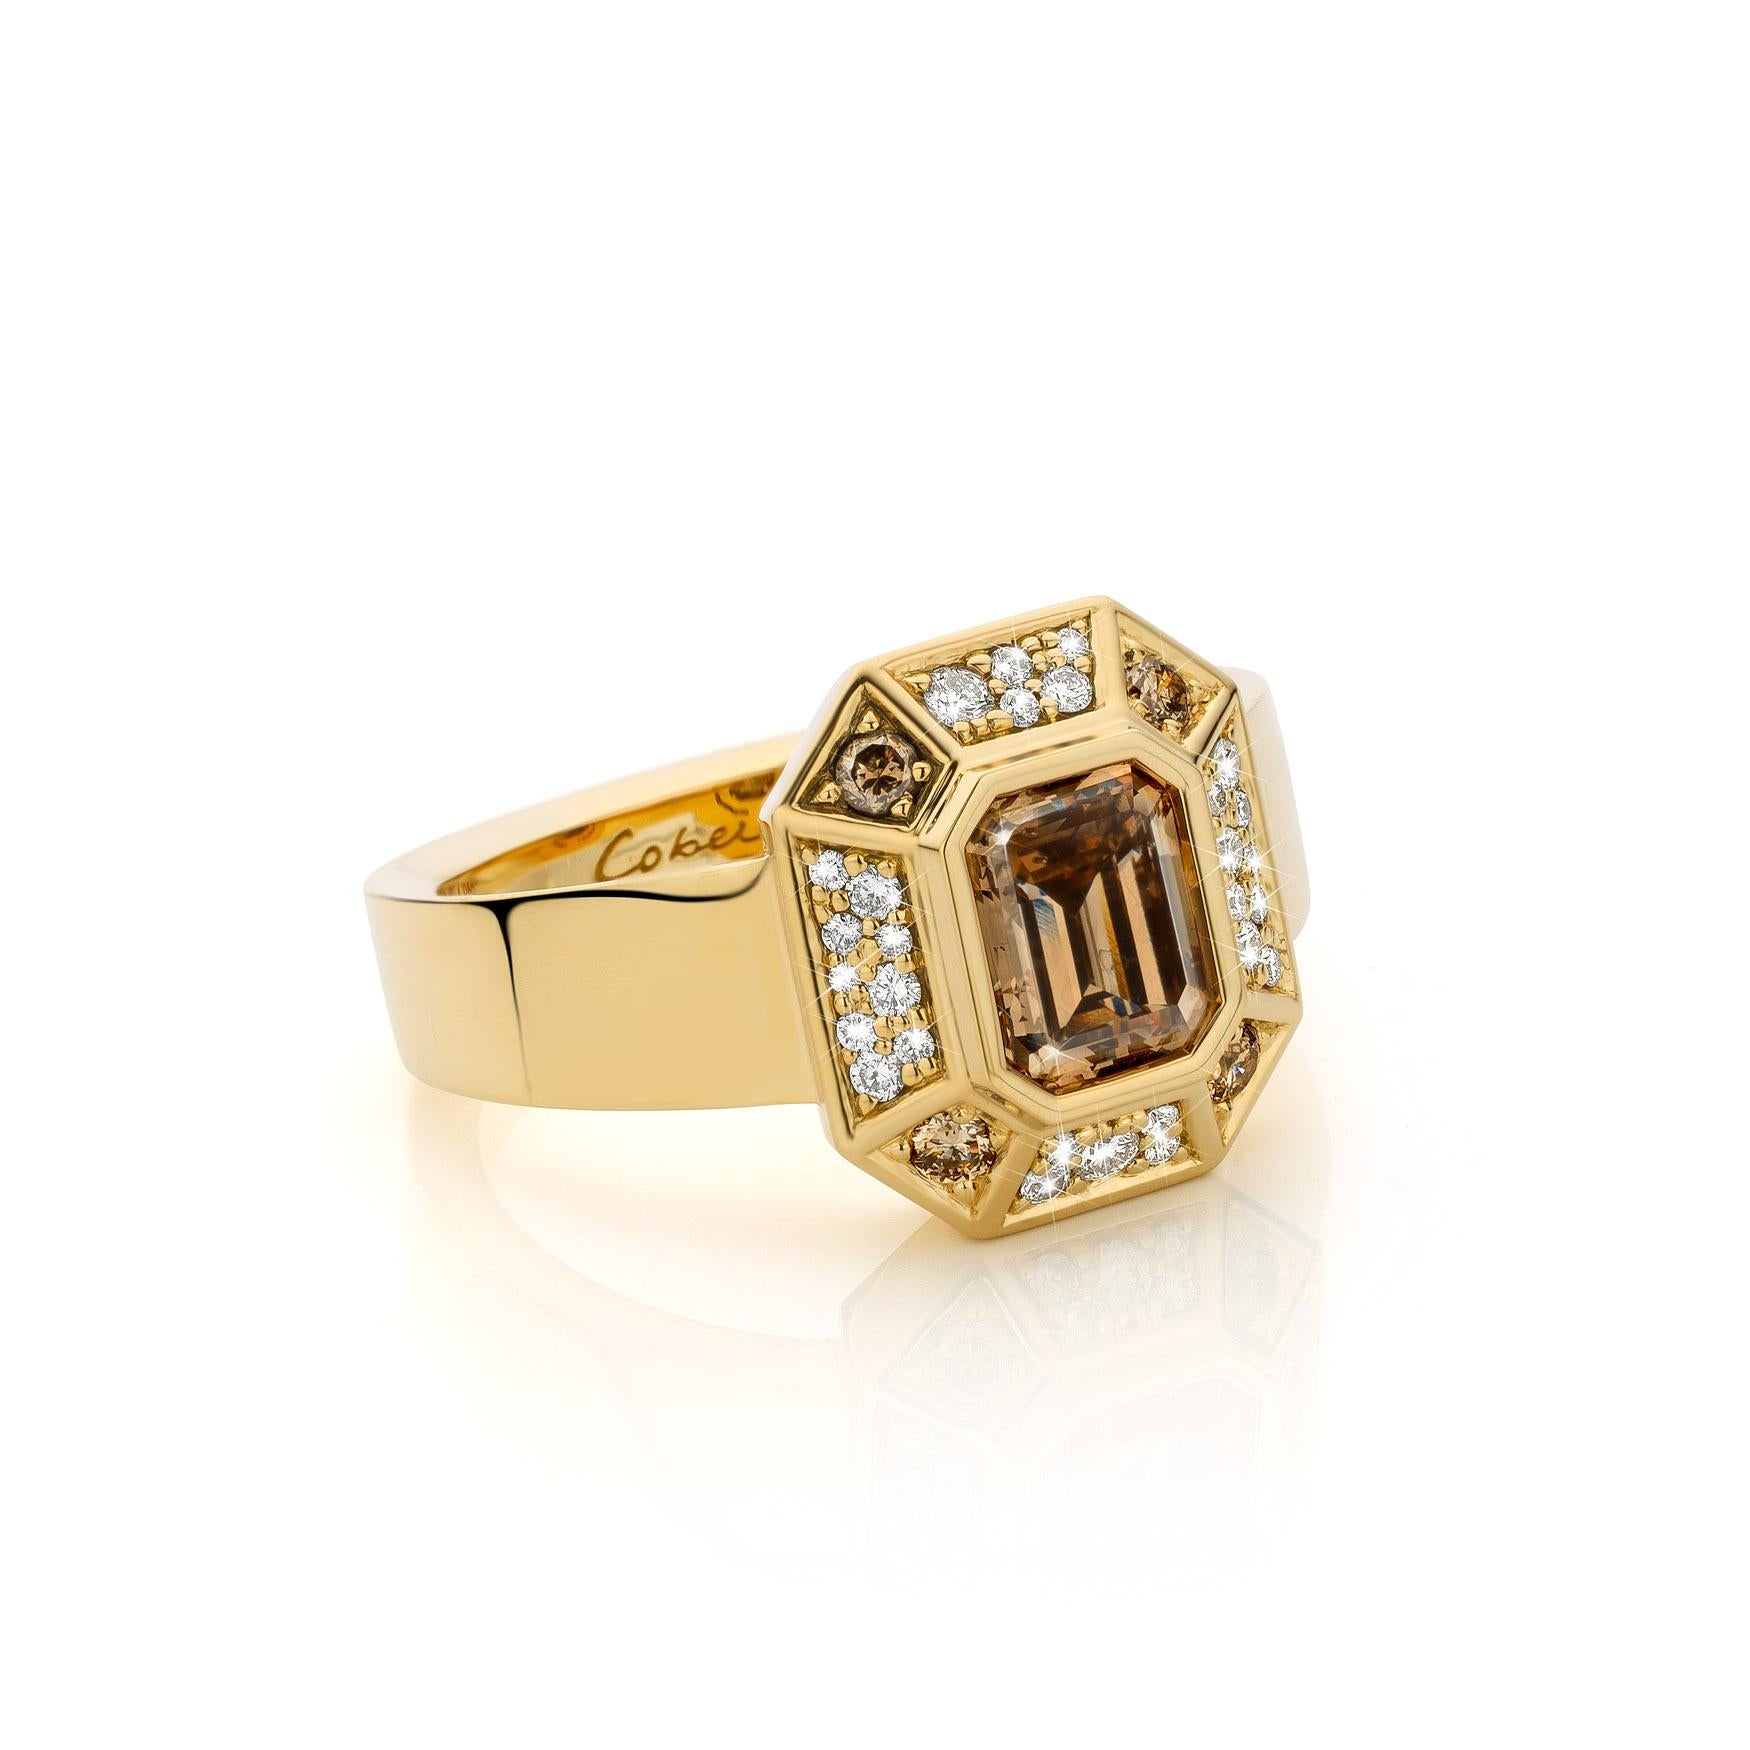 Contemporary Cober “Fancy brown Diamond” with 1.08 Carat  Brown Diamond and Diamonds Ring  For Sale